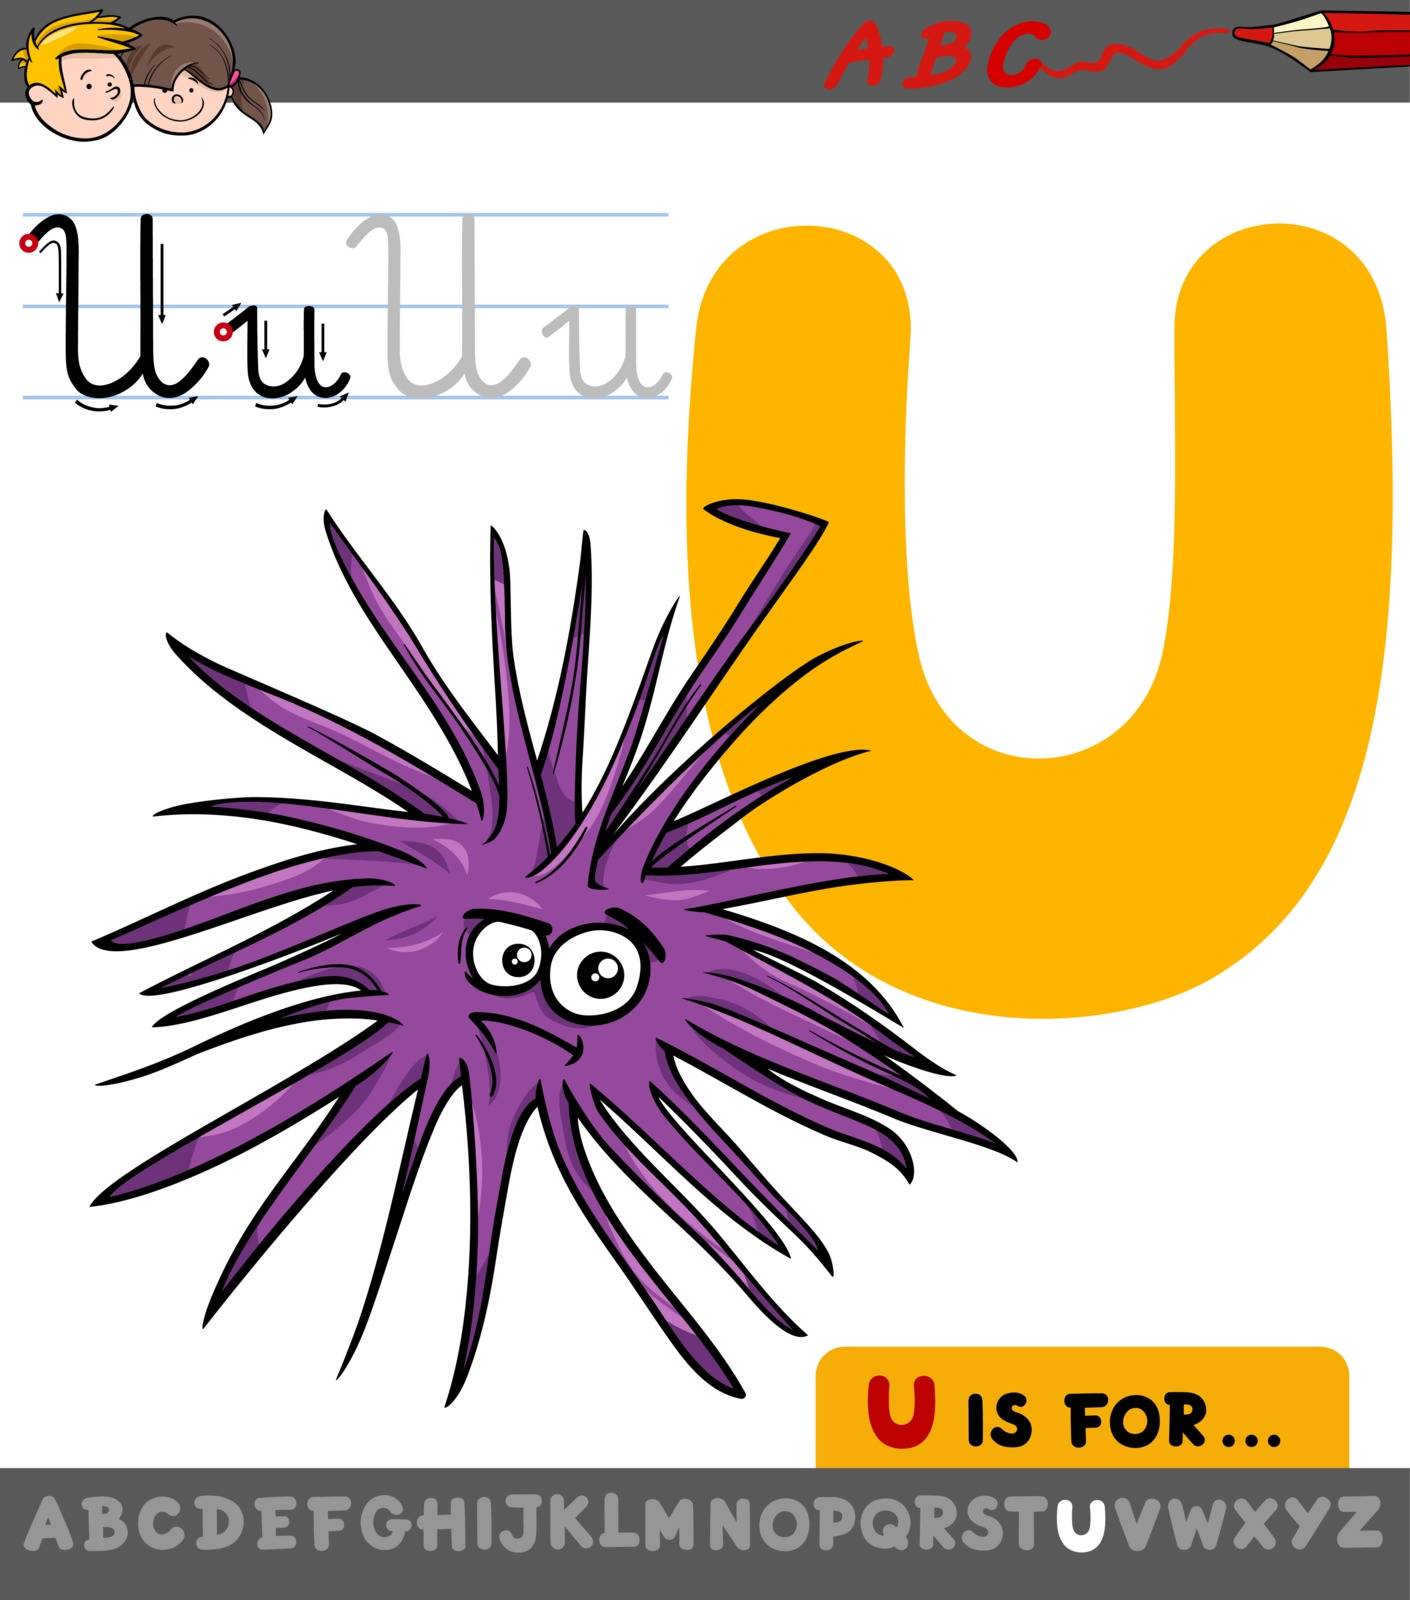 Educational Cartoon Illustration of Letter U from Alphabet with Urchin Sea Animal Character for Children